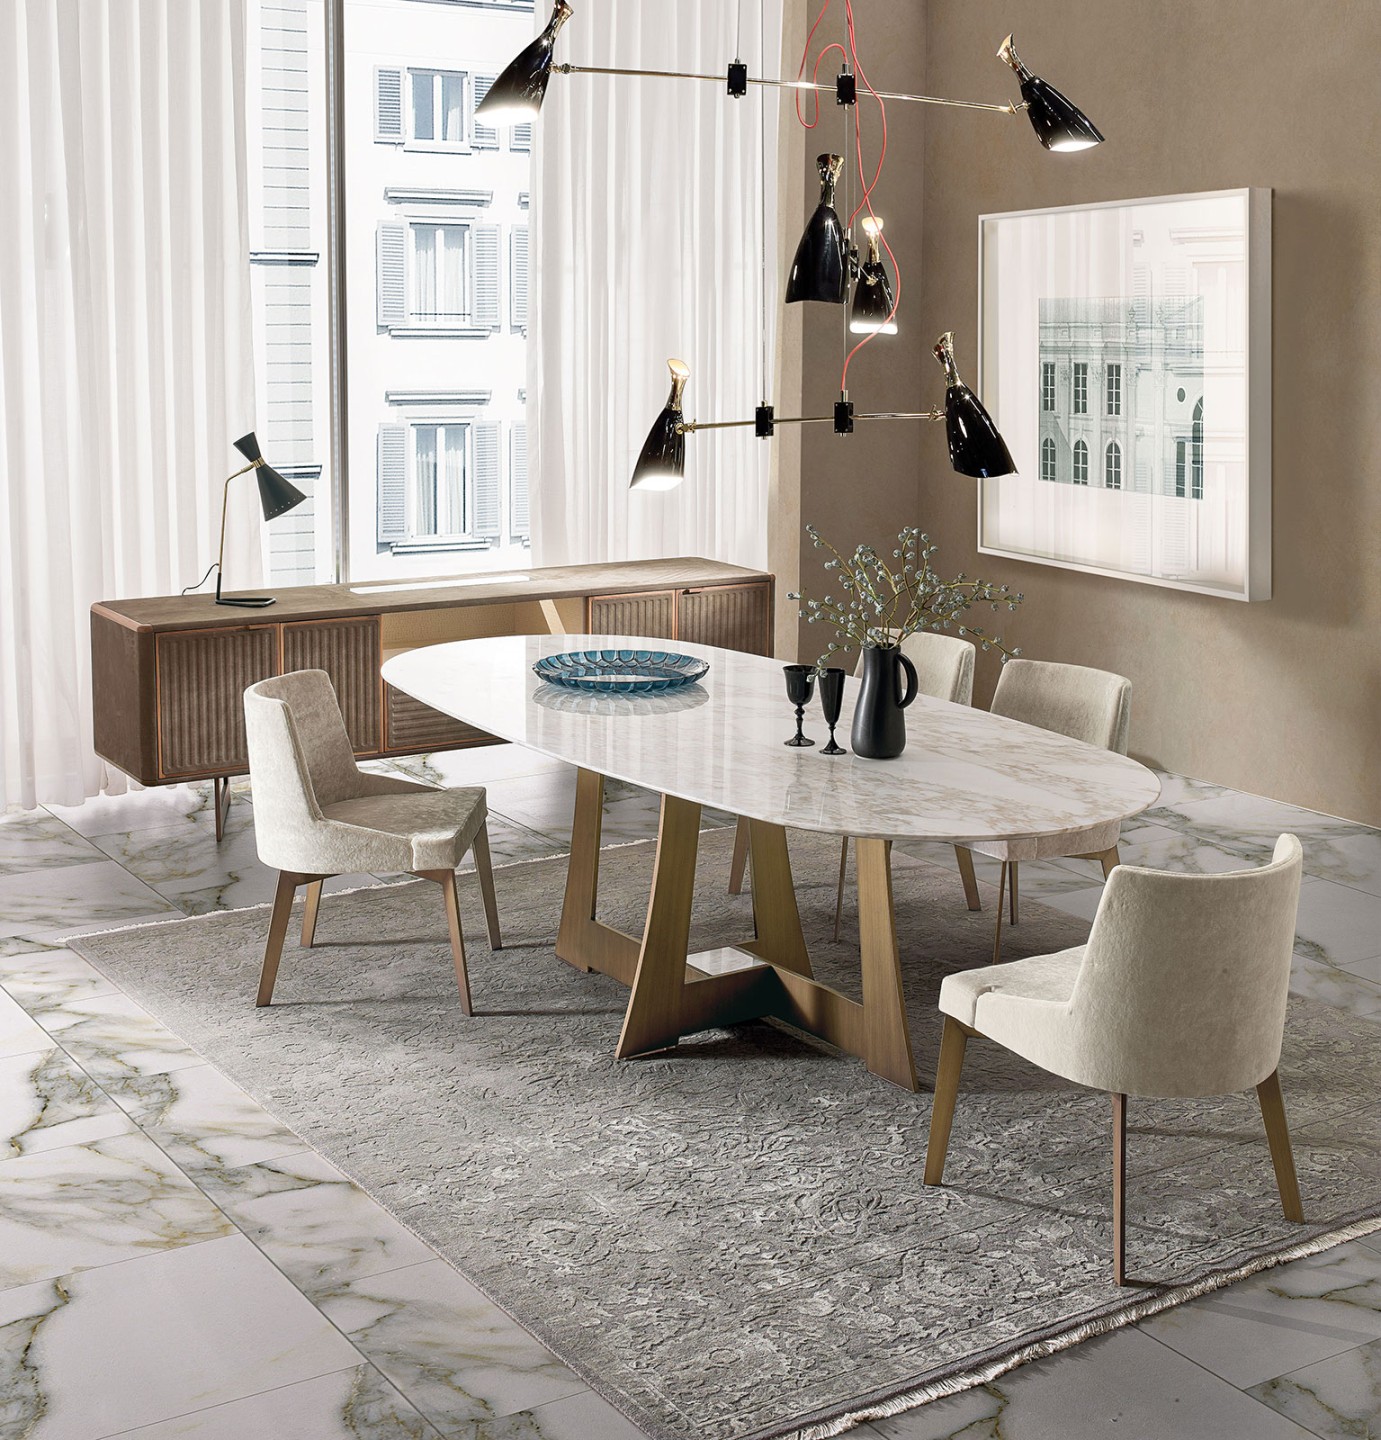 Mia oval dining table